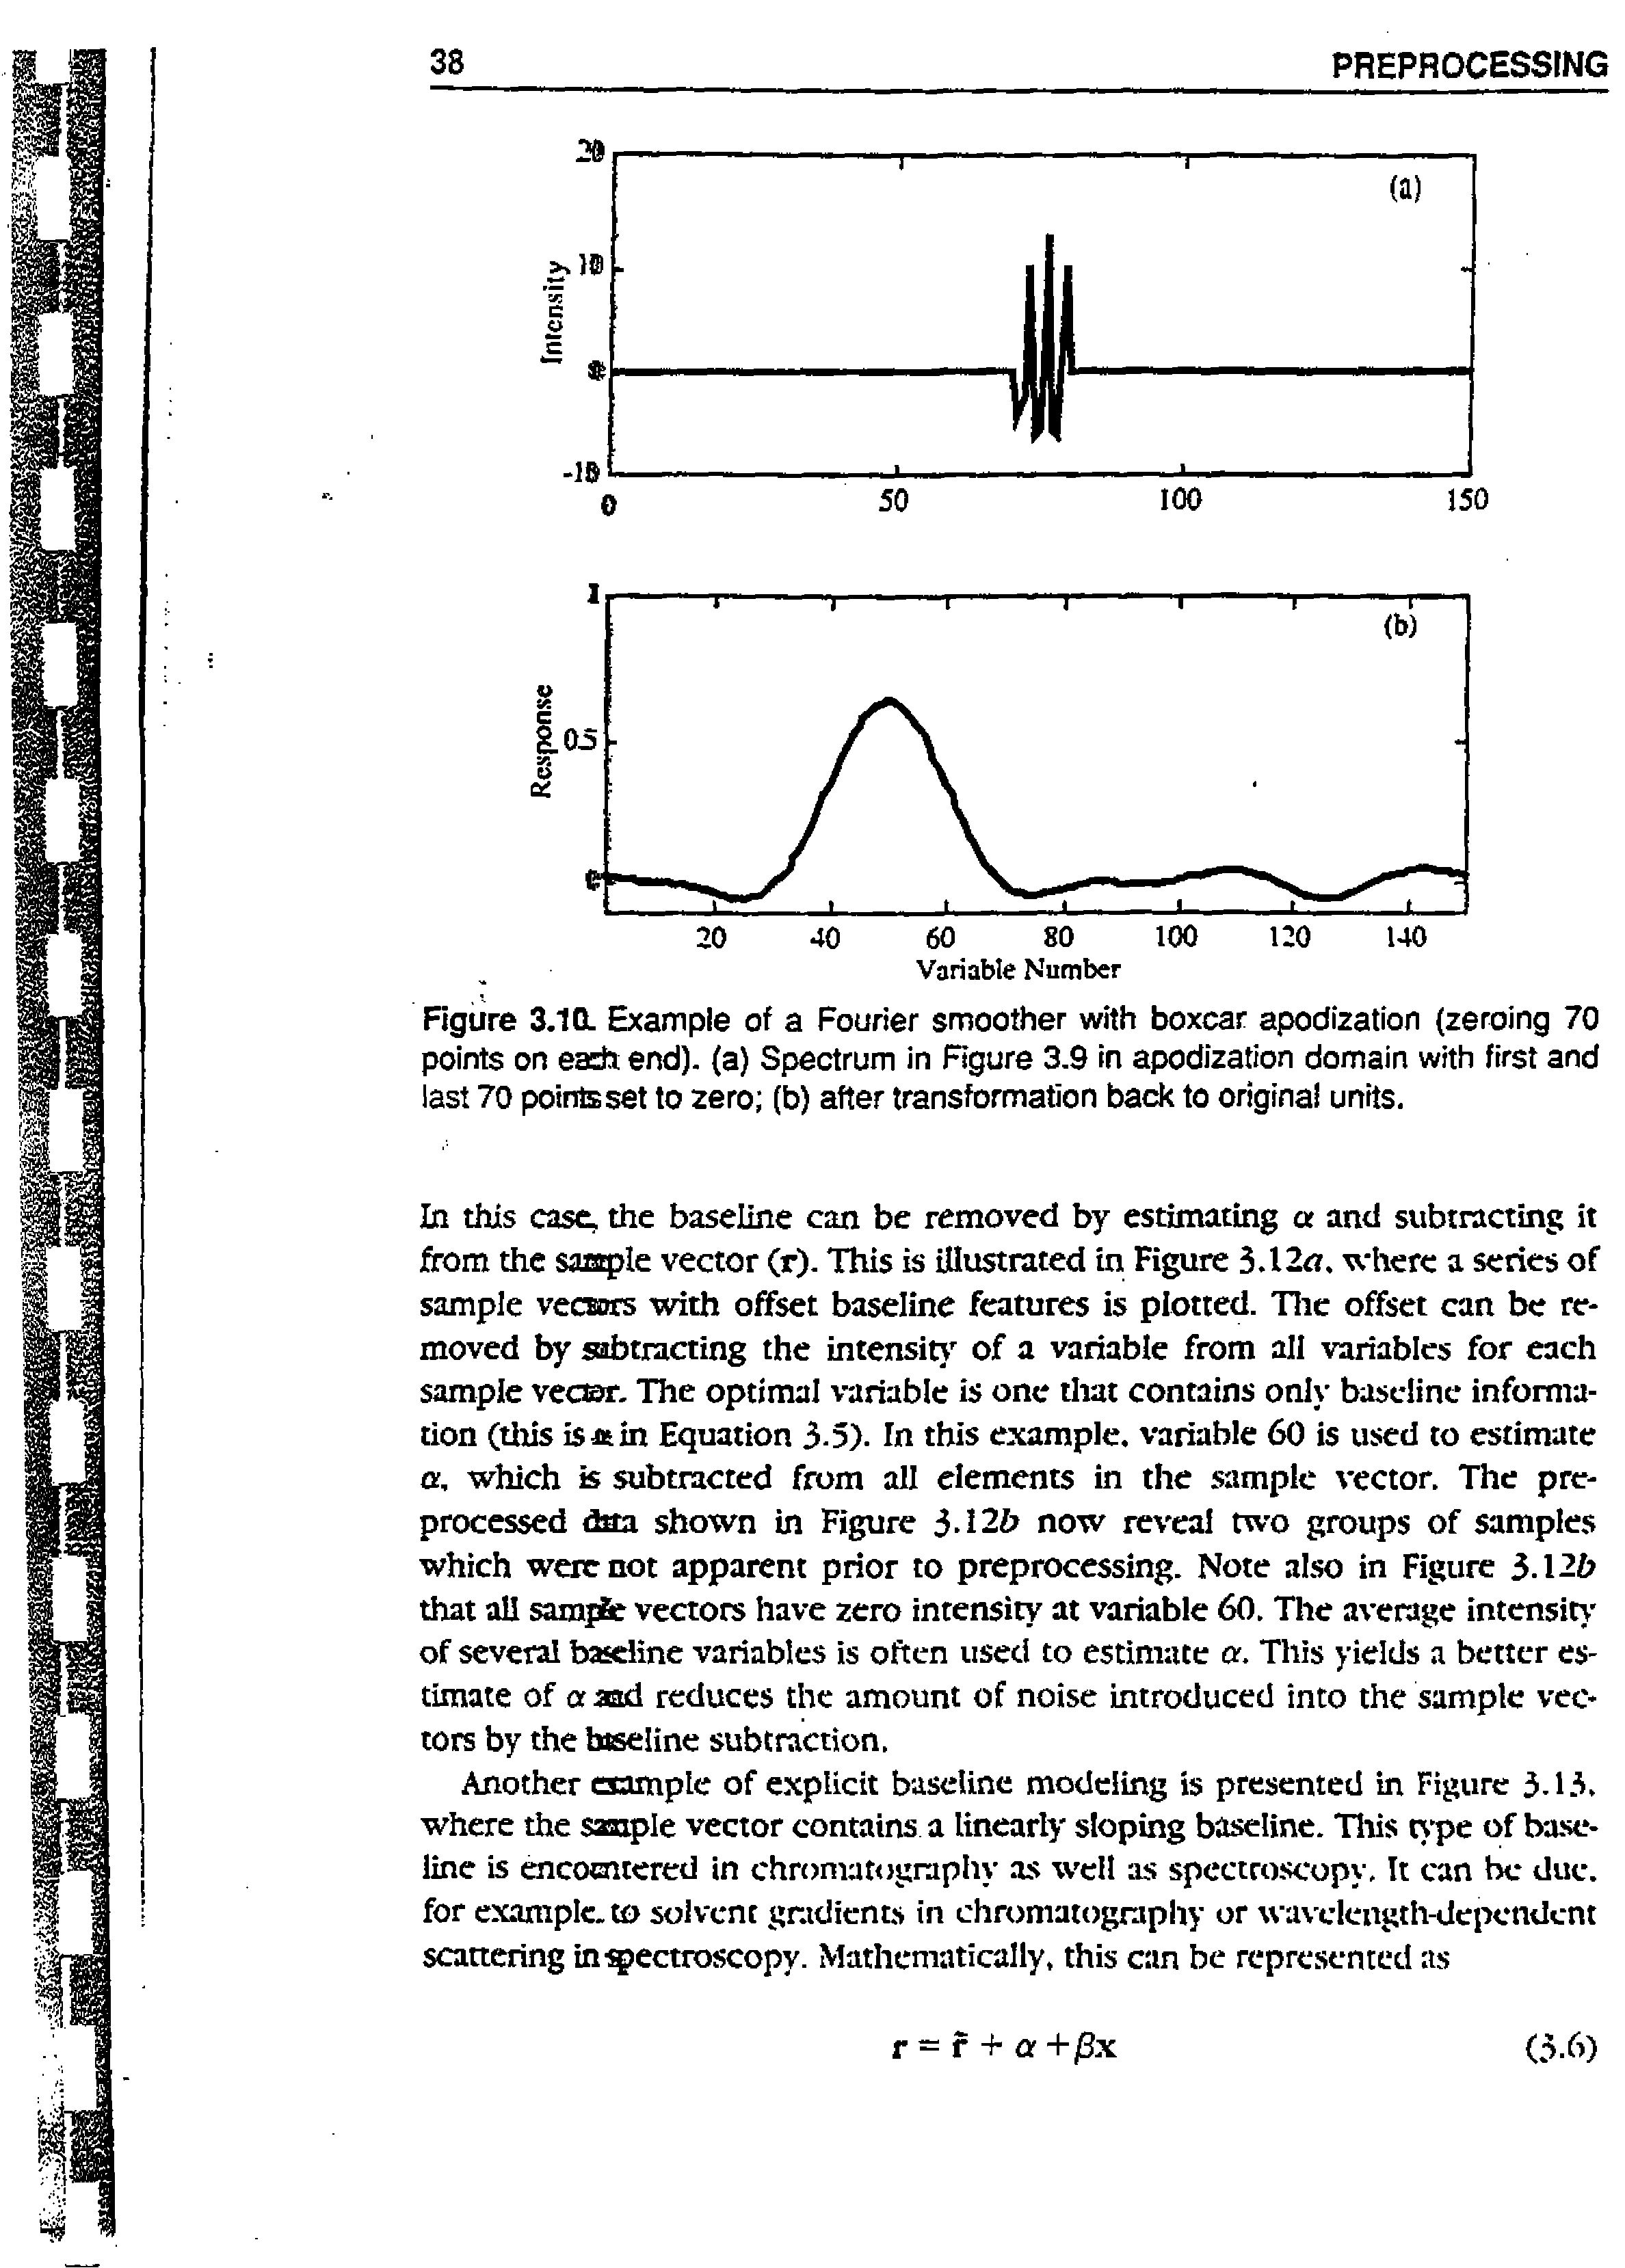 Figure 3.1 Ol Example of a Fourier smoother with boxcar apodization (zeroing 70 points on eadi end), (a) Spectrum in Figure 3.9 in apodization domain with first and last 70 points set to zero (b) after transformation back to original units.